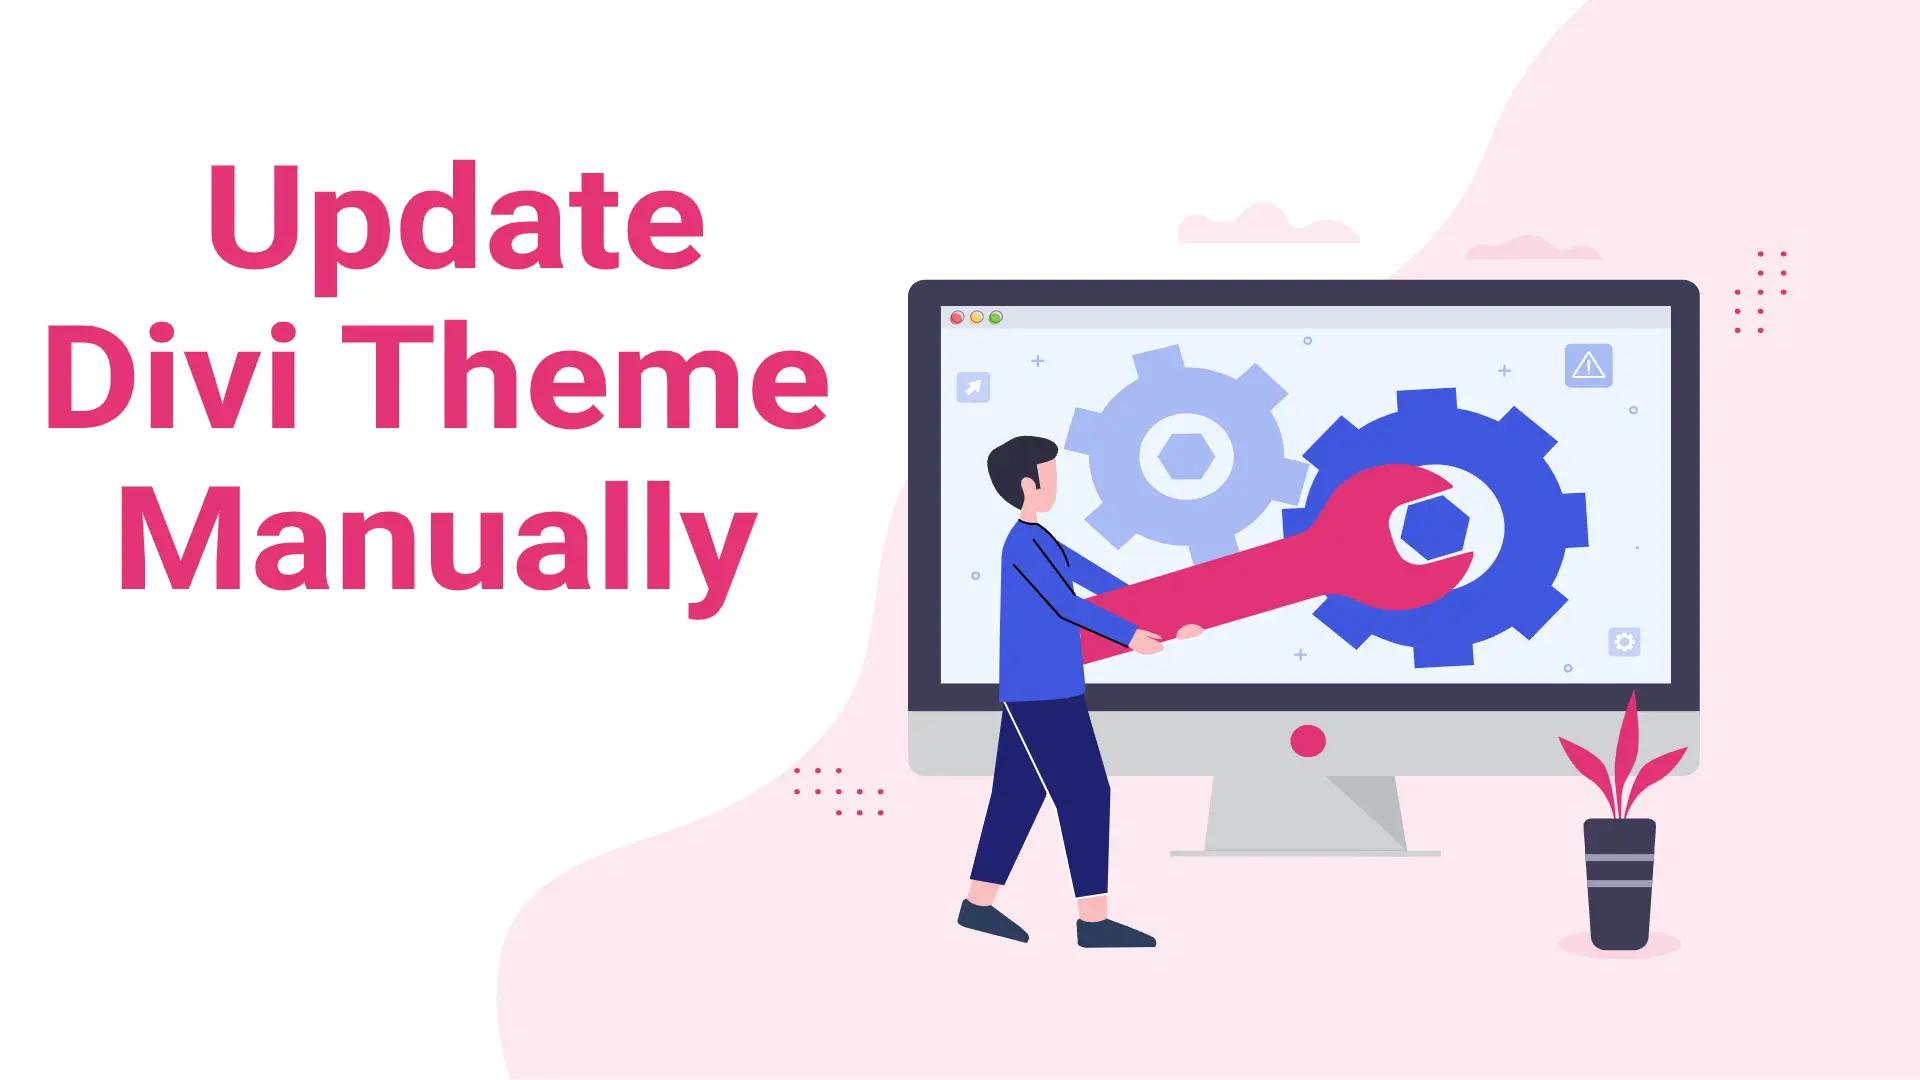 Manually update your Divi theme